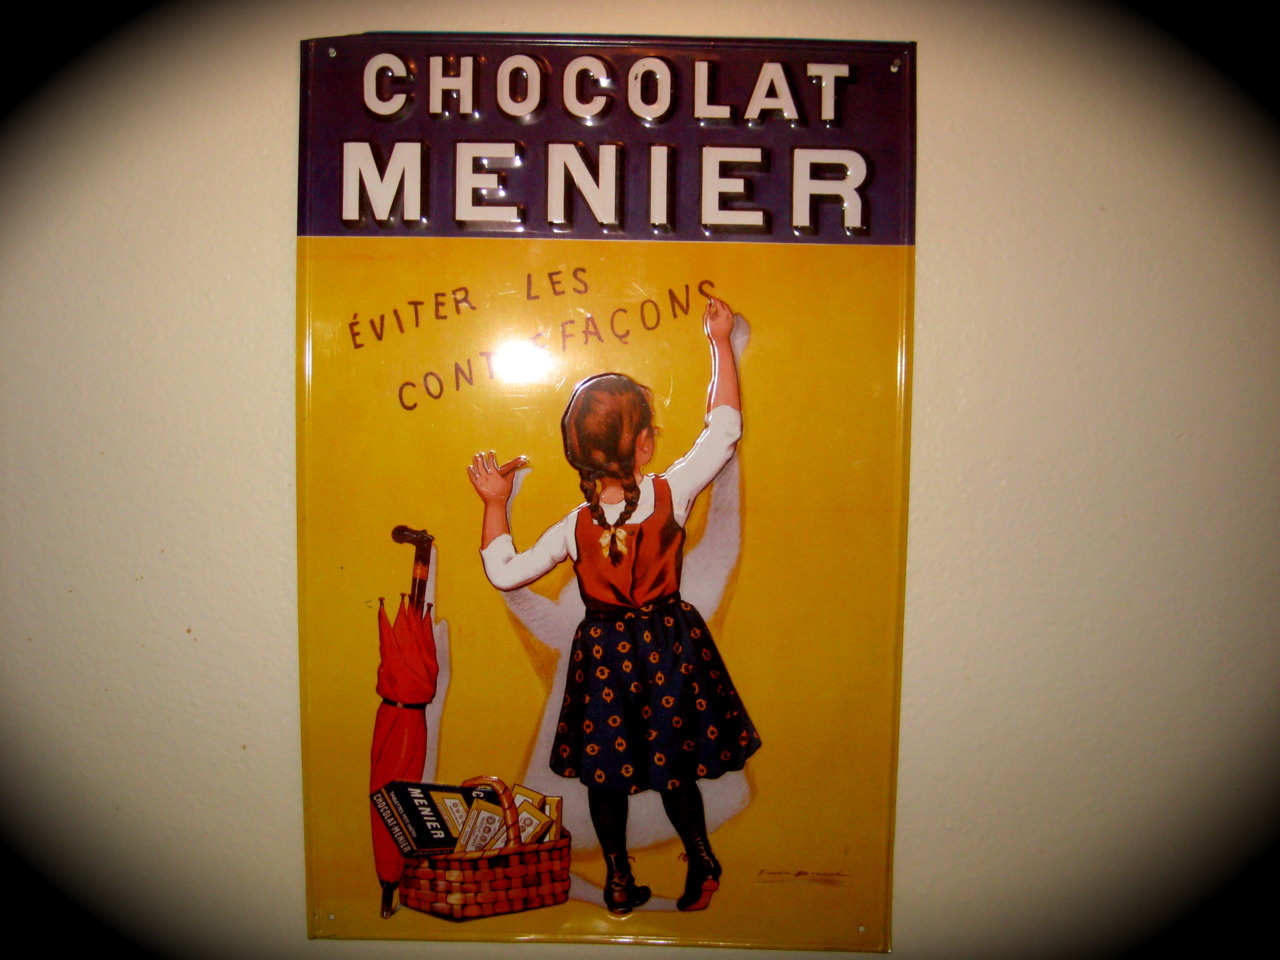 This ad for a now defunct chocolate company is the newest addition to my kitchen.
I don&rsquo;t speak French, but I understand that this little girl and I will both be undone by our love of sweets.
Curse you, candies!!!!!